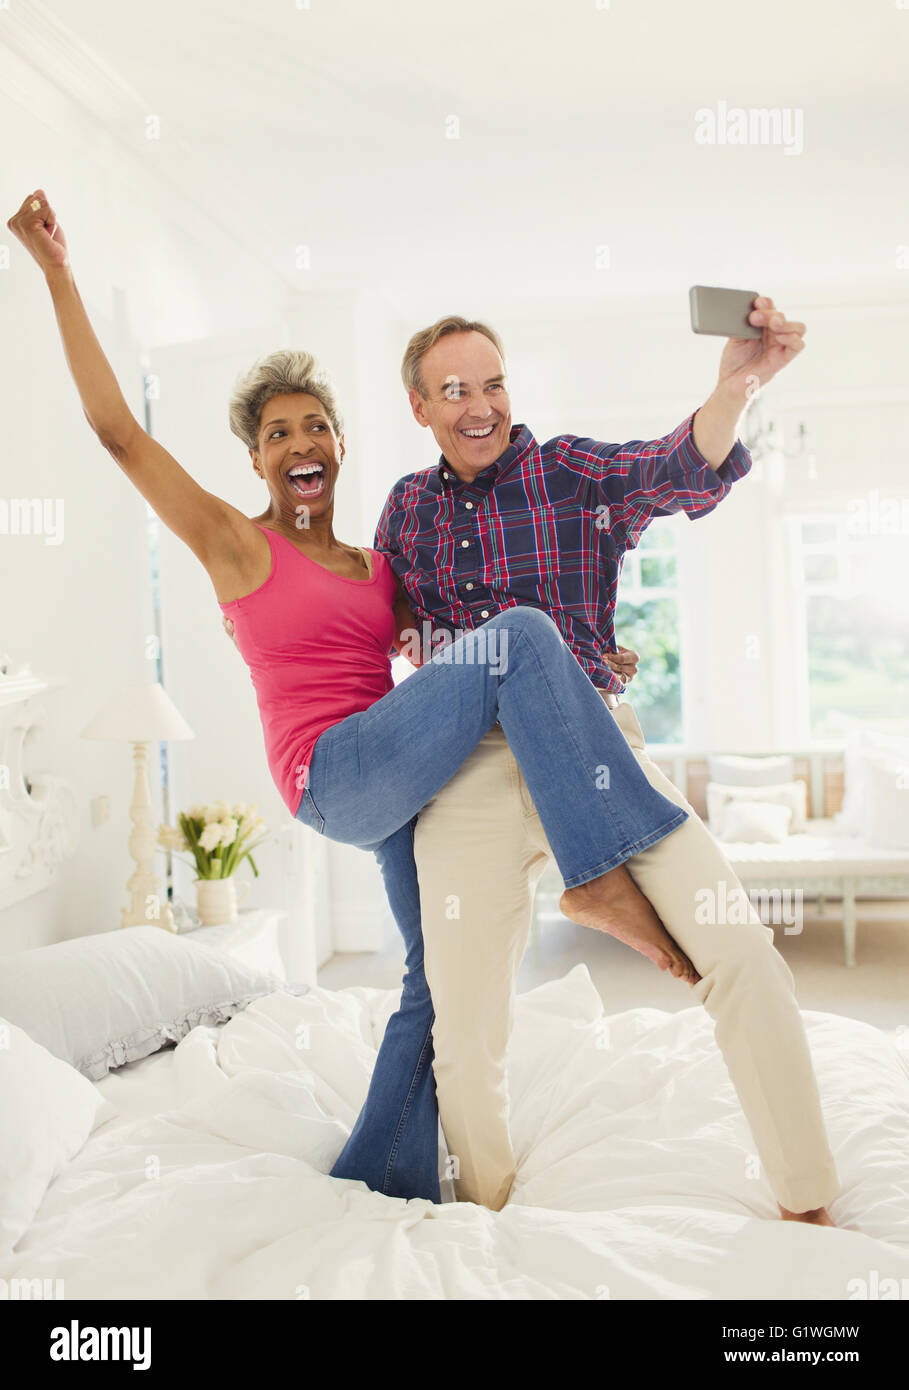 Playful mature couple taking selfie standing on bed Stock Photo